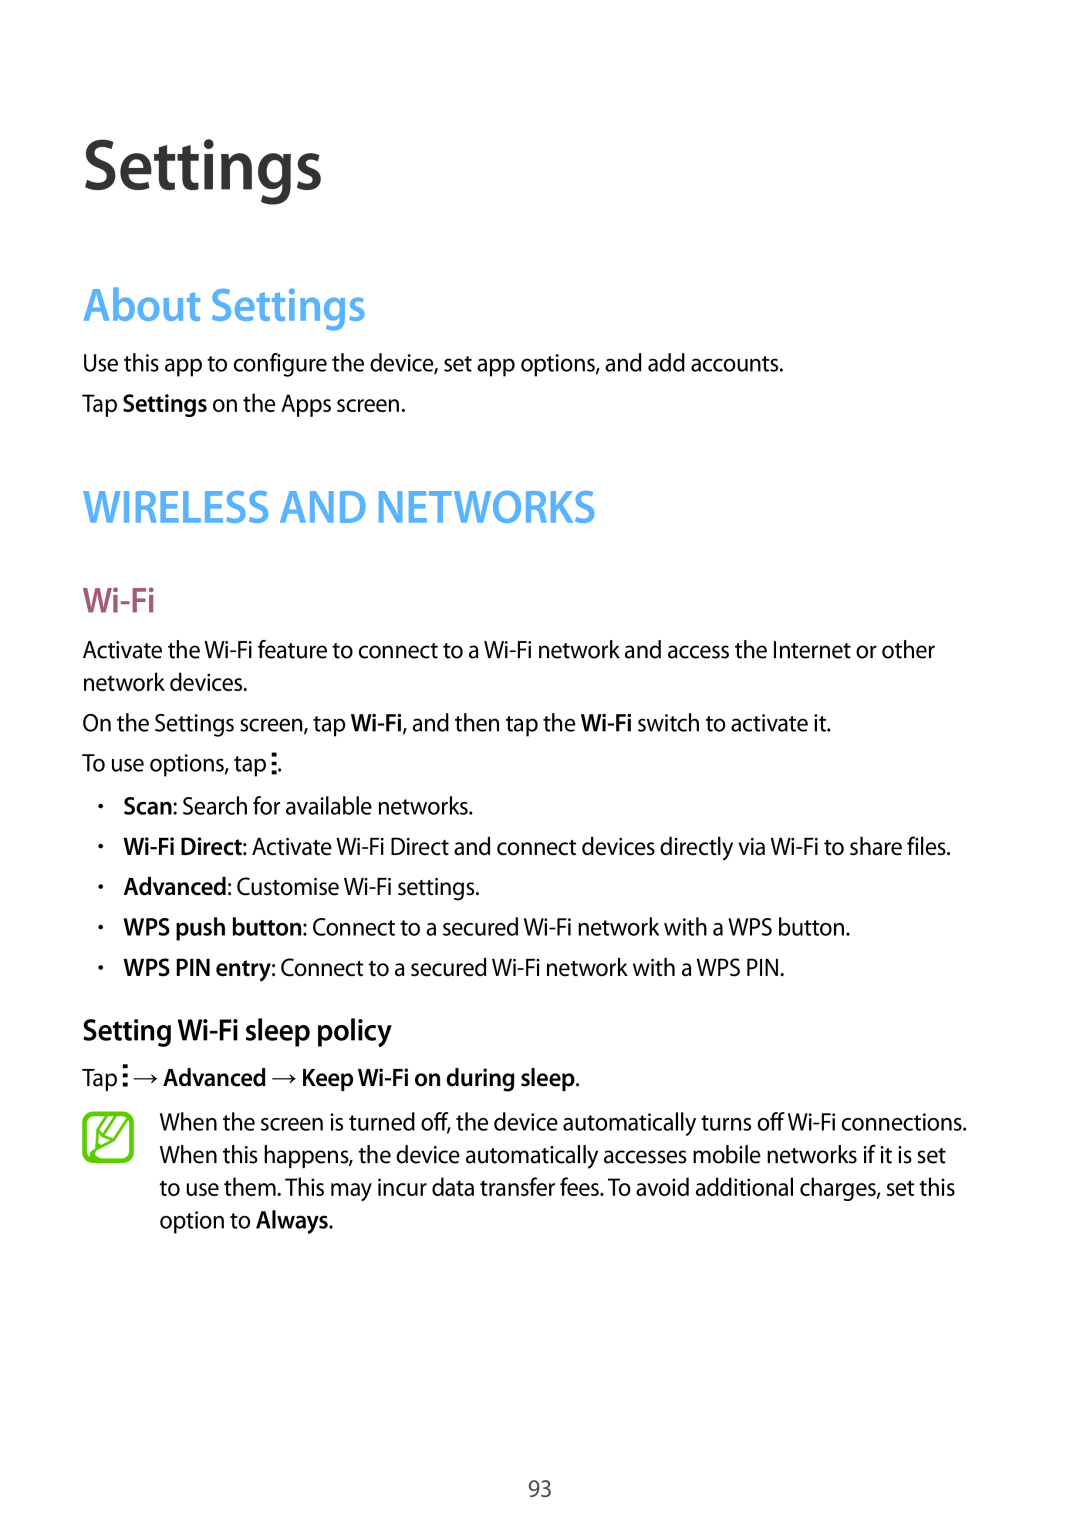 Samsung SM-G357FZWZOPT, SM-G357FZWZXEO manual About Settings, Wireless And Networks, Setting Wi-Fi sleep policy 